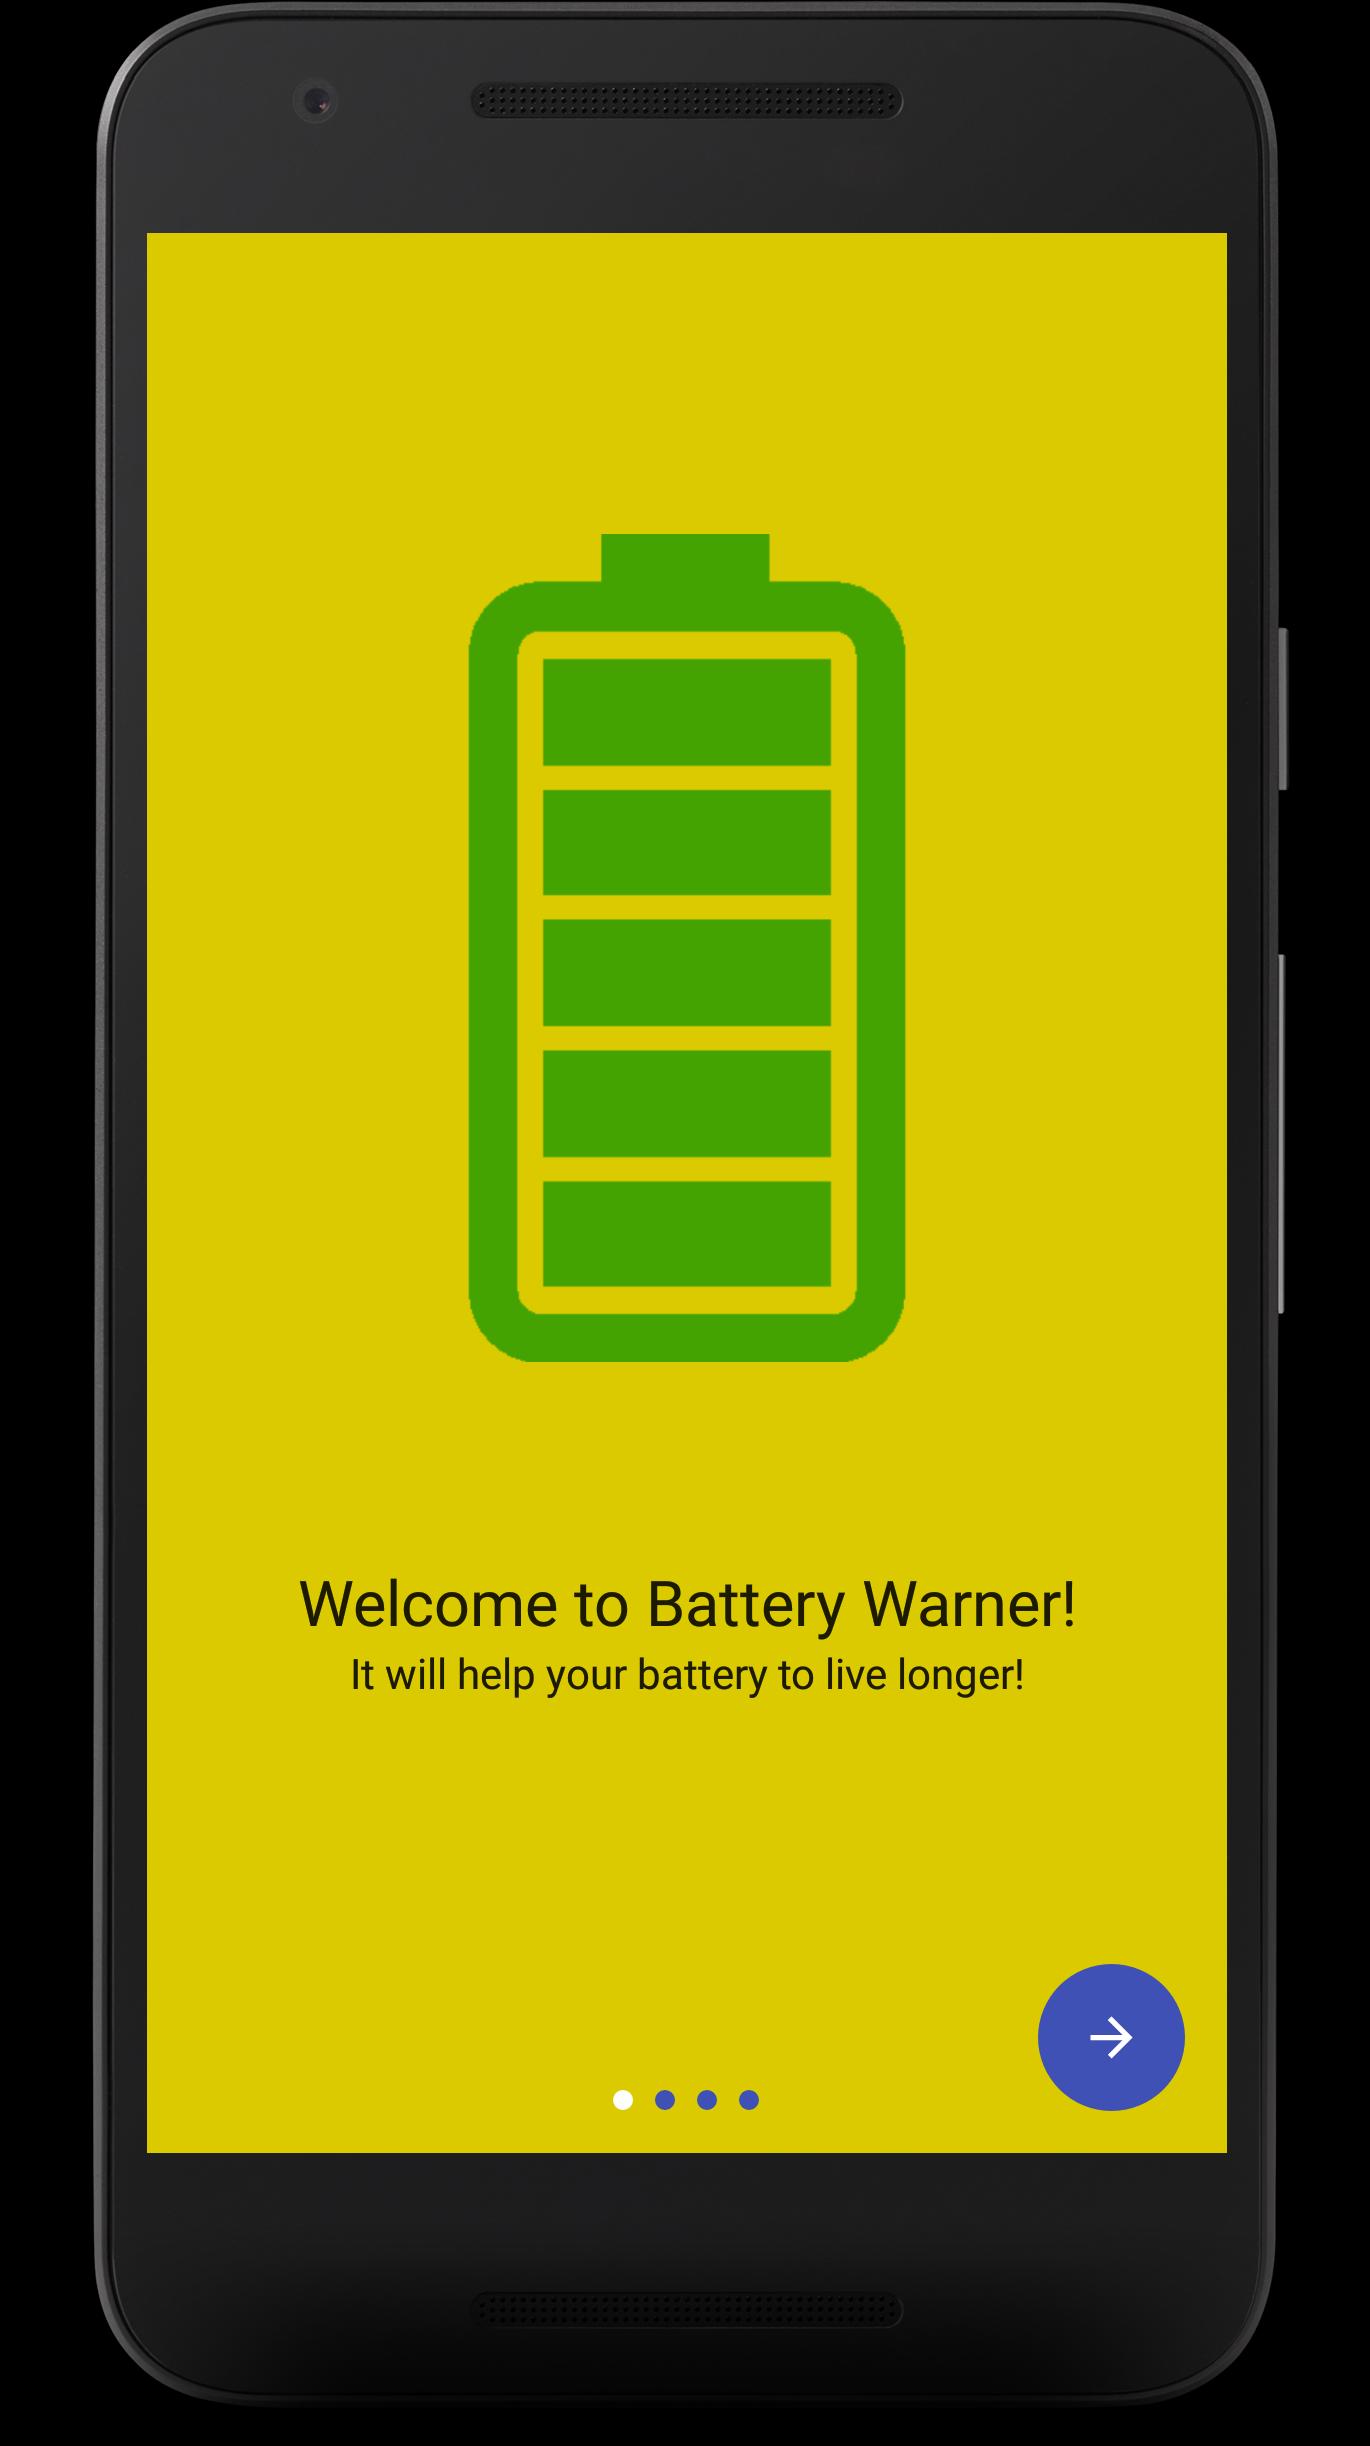 Battery alert. Android Low Battery. Low Battery Warning. Battery Warning Card.